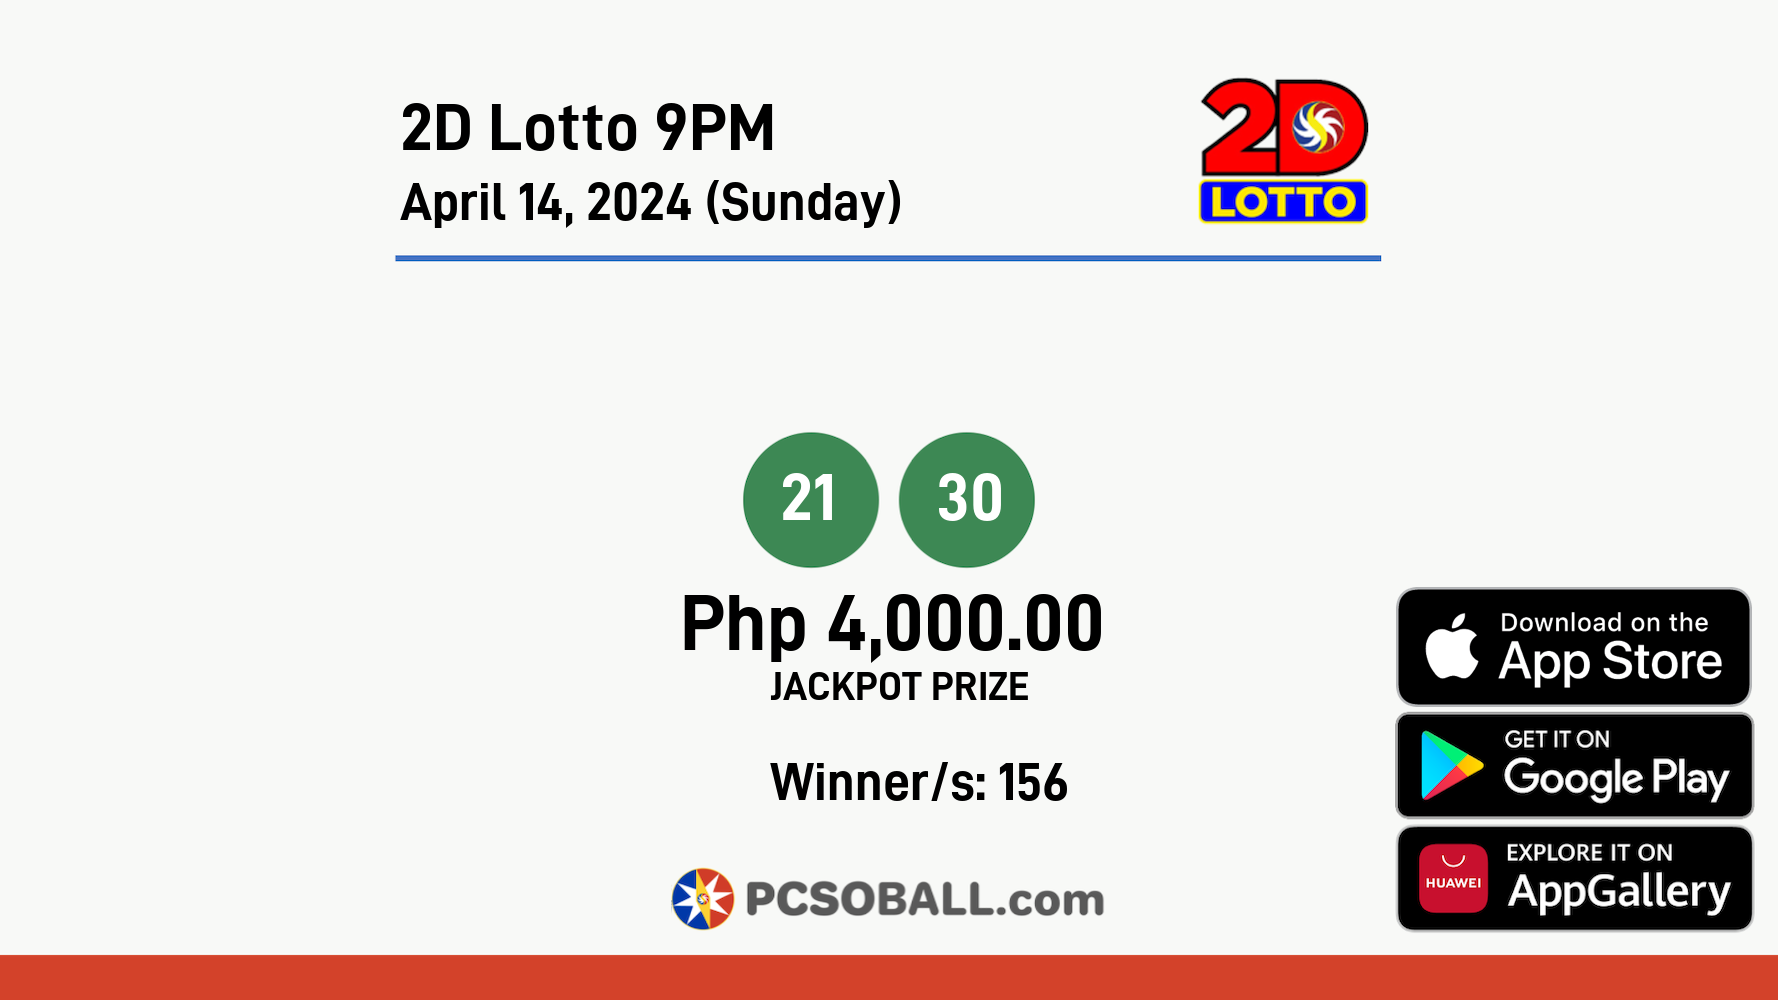 2D Lotto 9PM April 14, 2024 (Sunday) Result